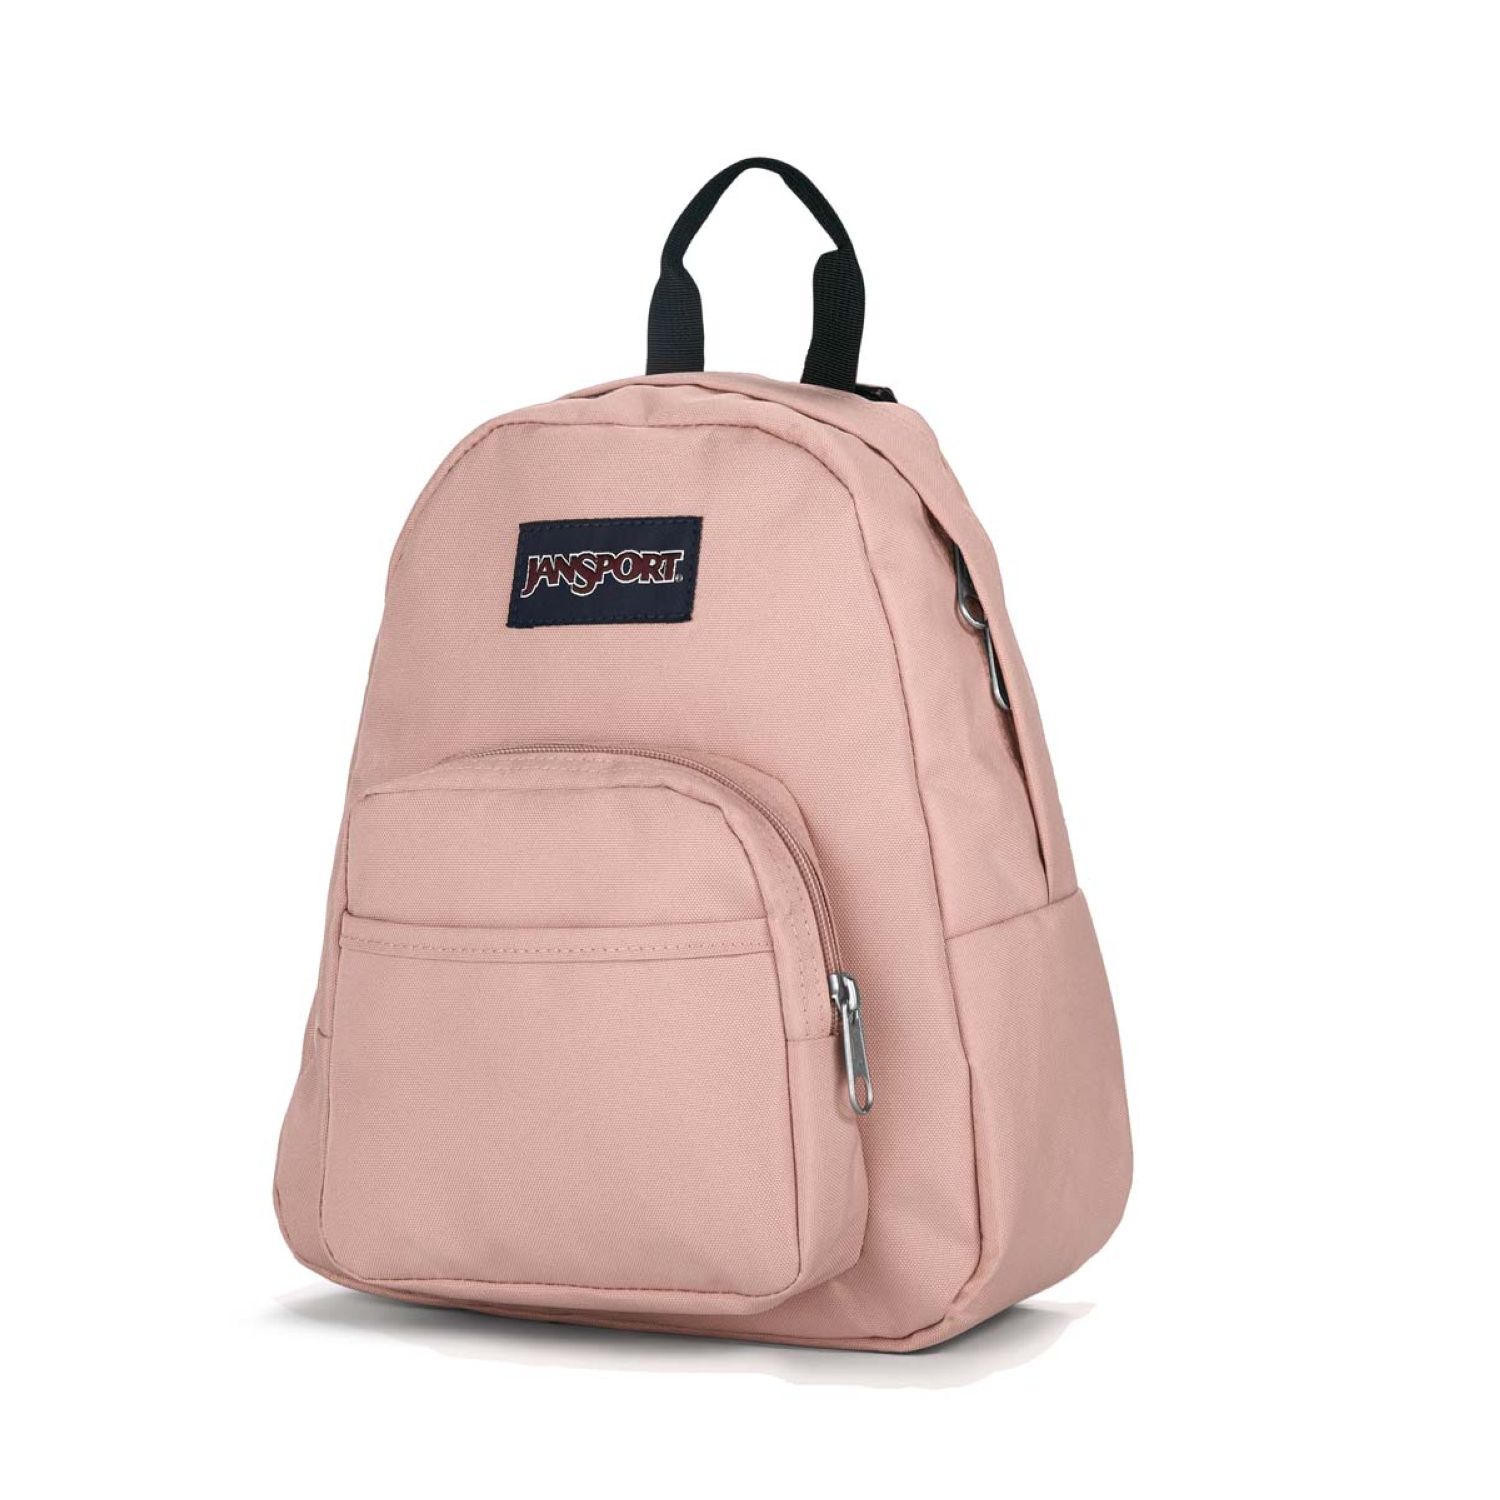 Buy Jansport Half Pint Backpack - Misty Rose in Singapore & Malaysia ...